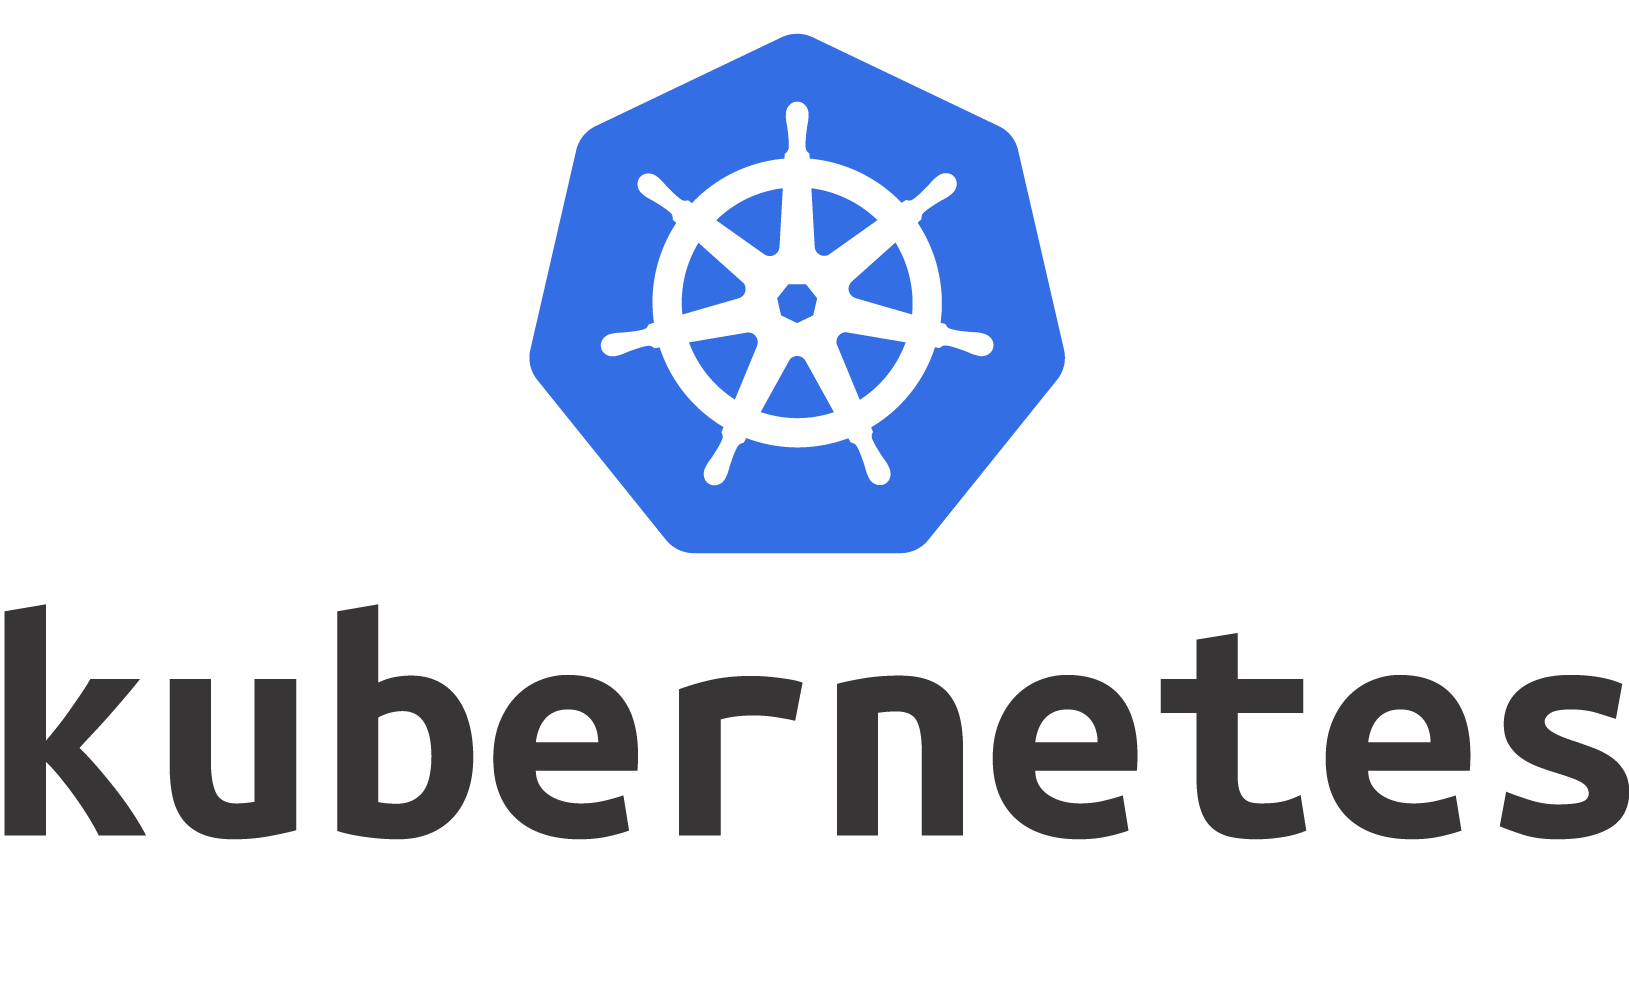 K8s - What Is Kubernetes?